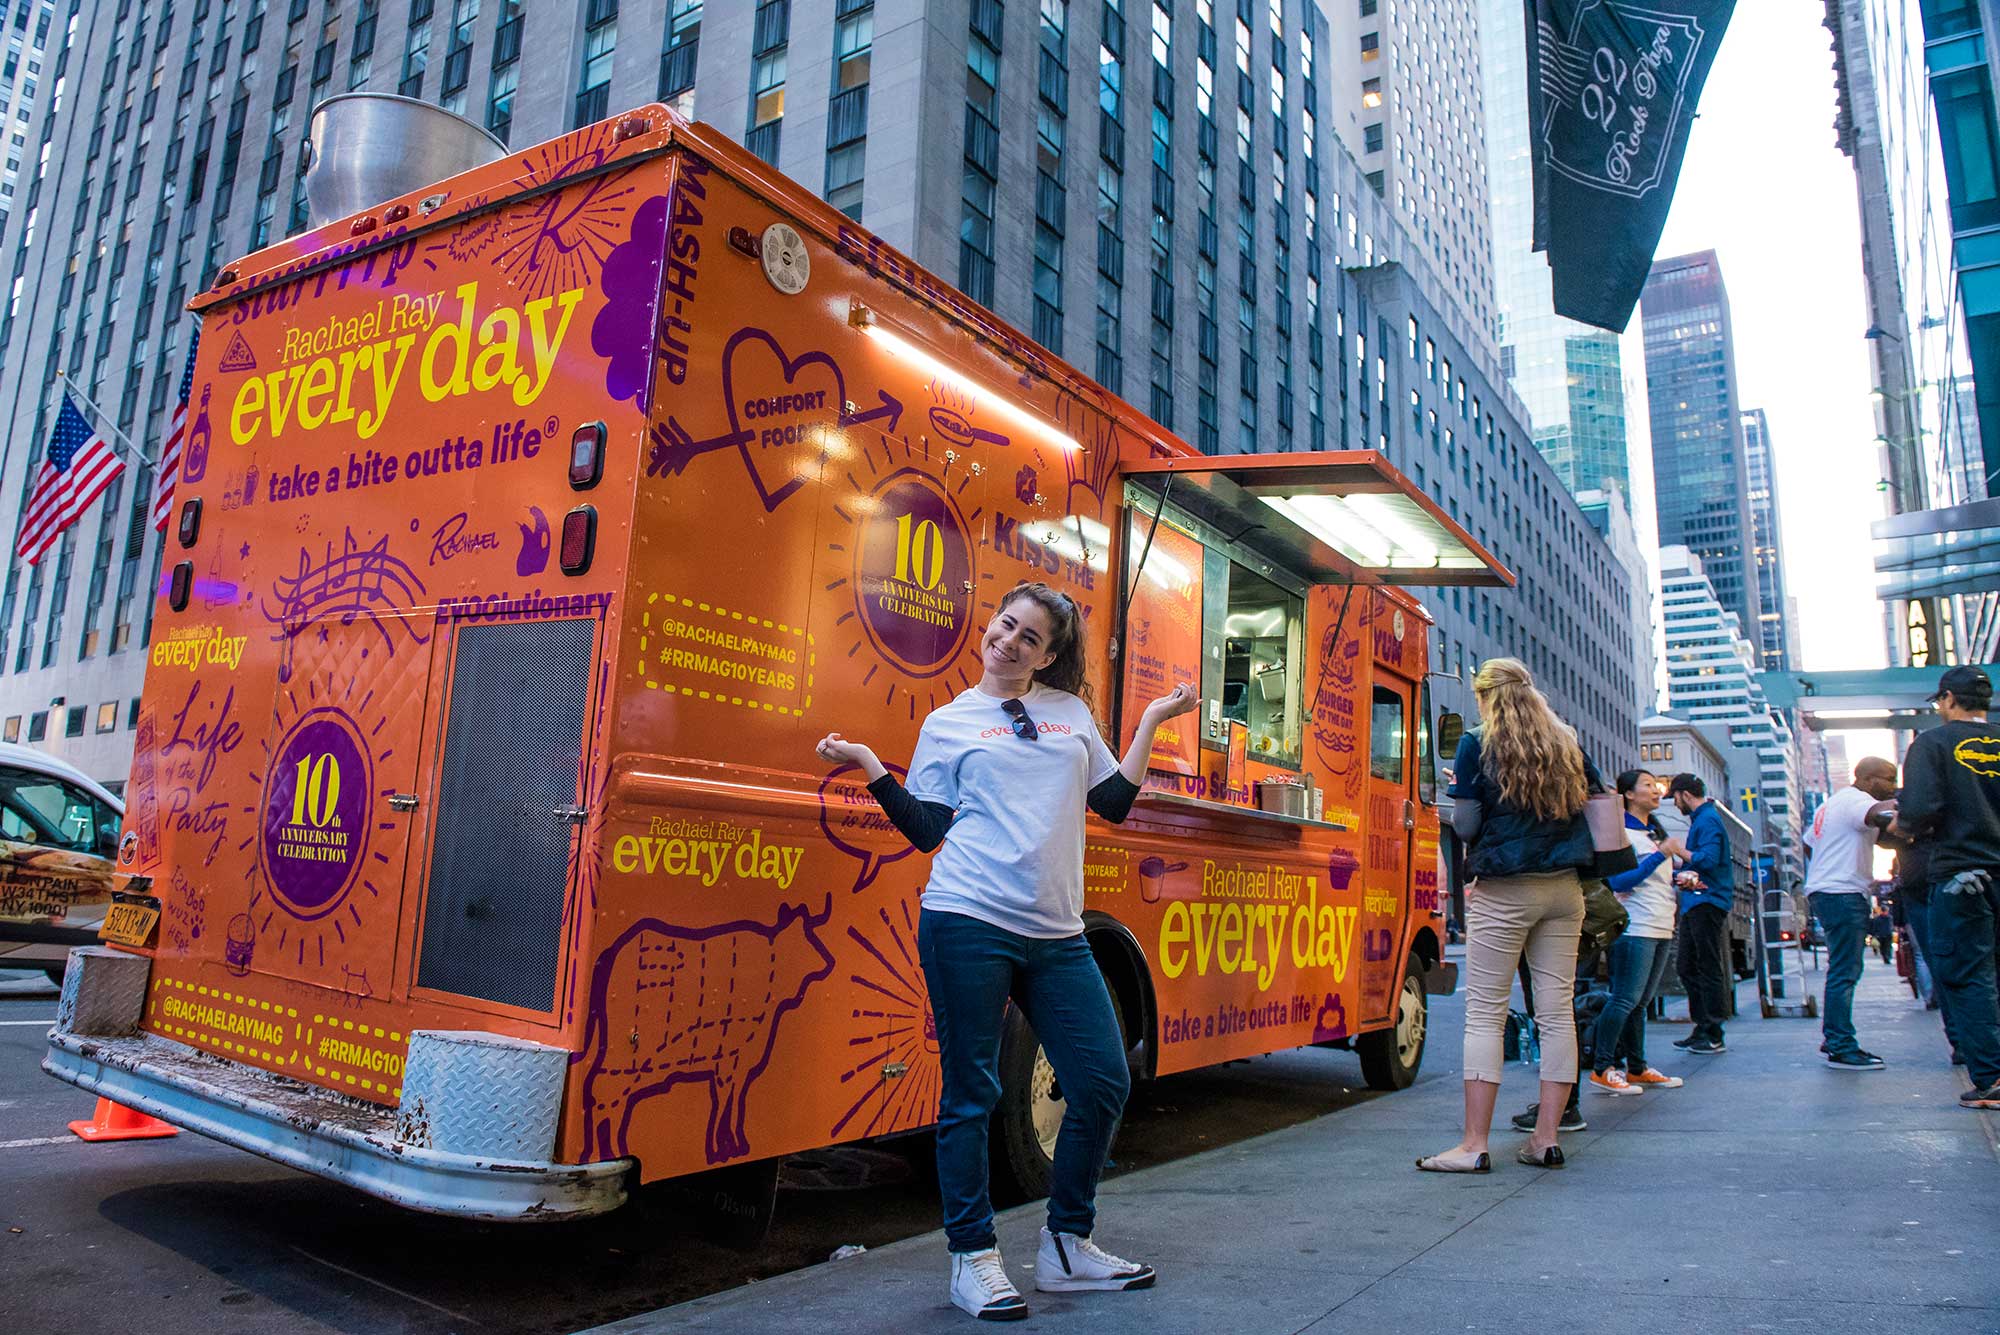 A Brand Ambassador poses with the Rachel Ray Every Day food truck, where guests received free burgers and branded sunglasses.